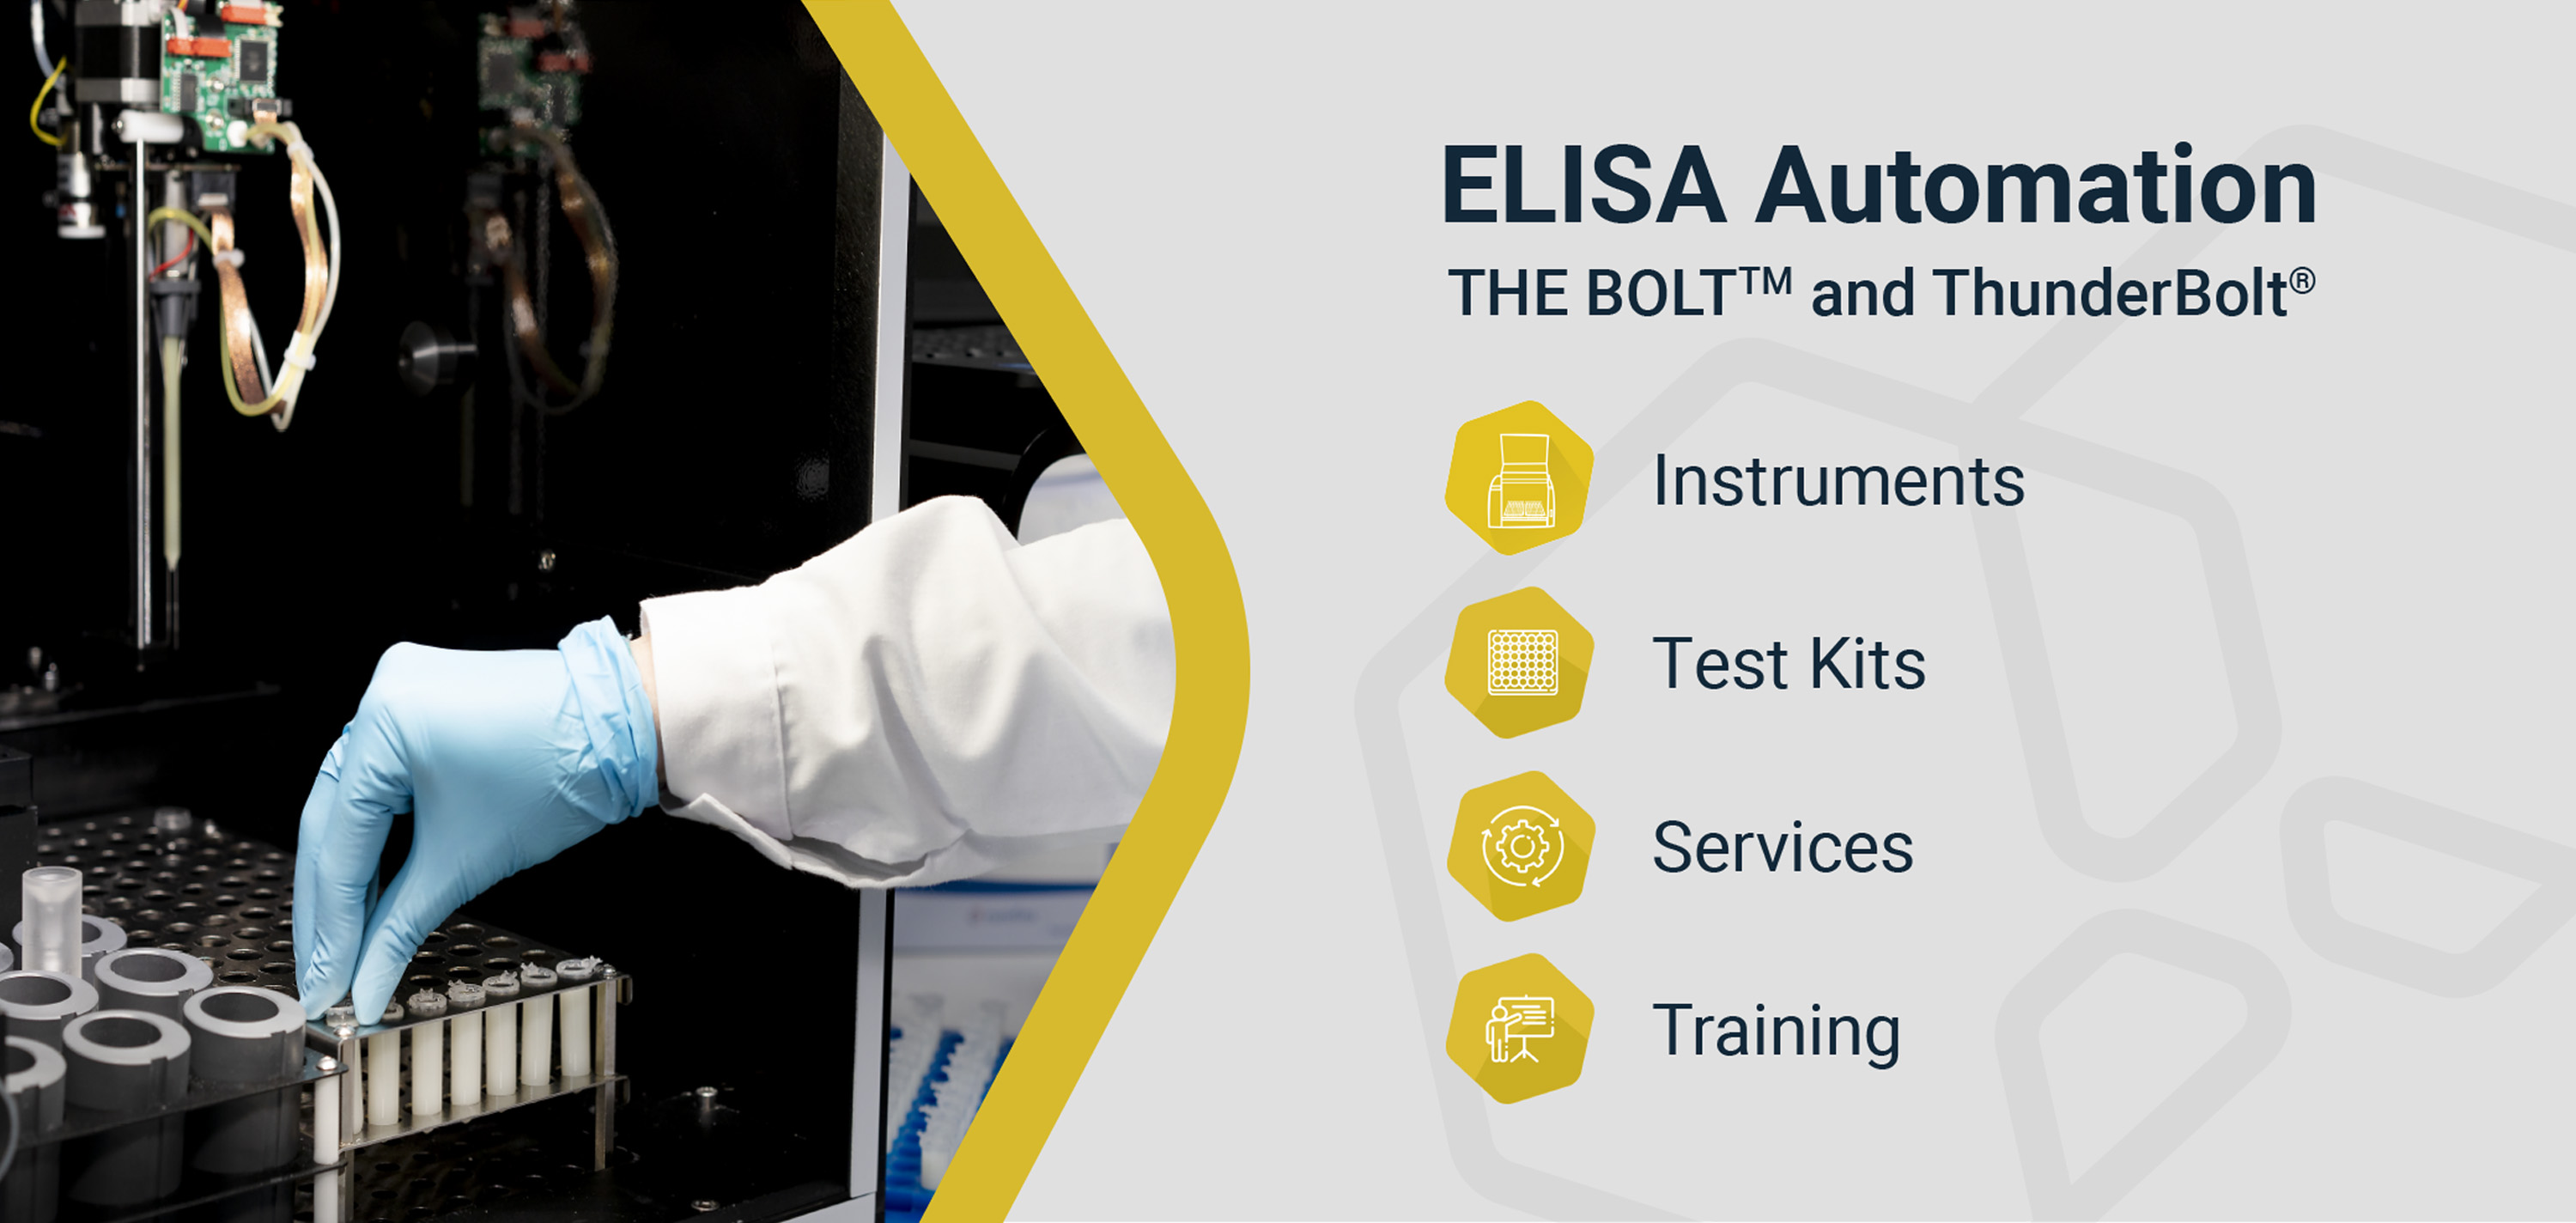 Supporting the routine: a bundle of instruments, services, training and test kits